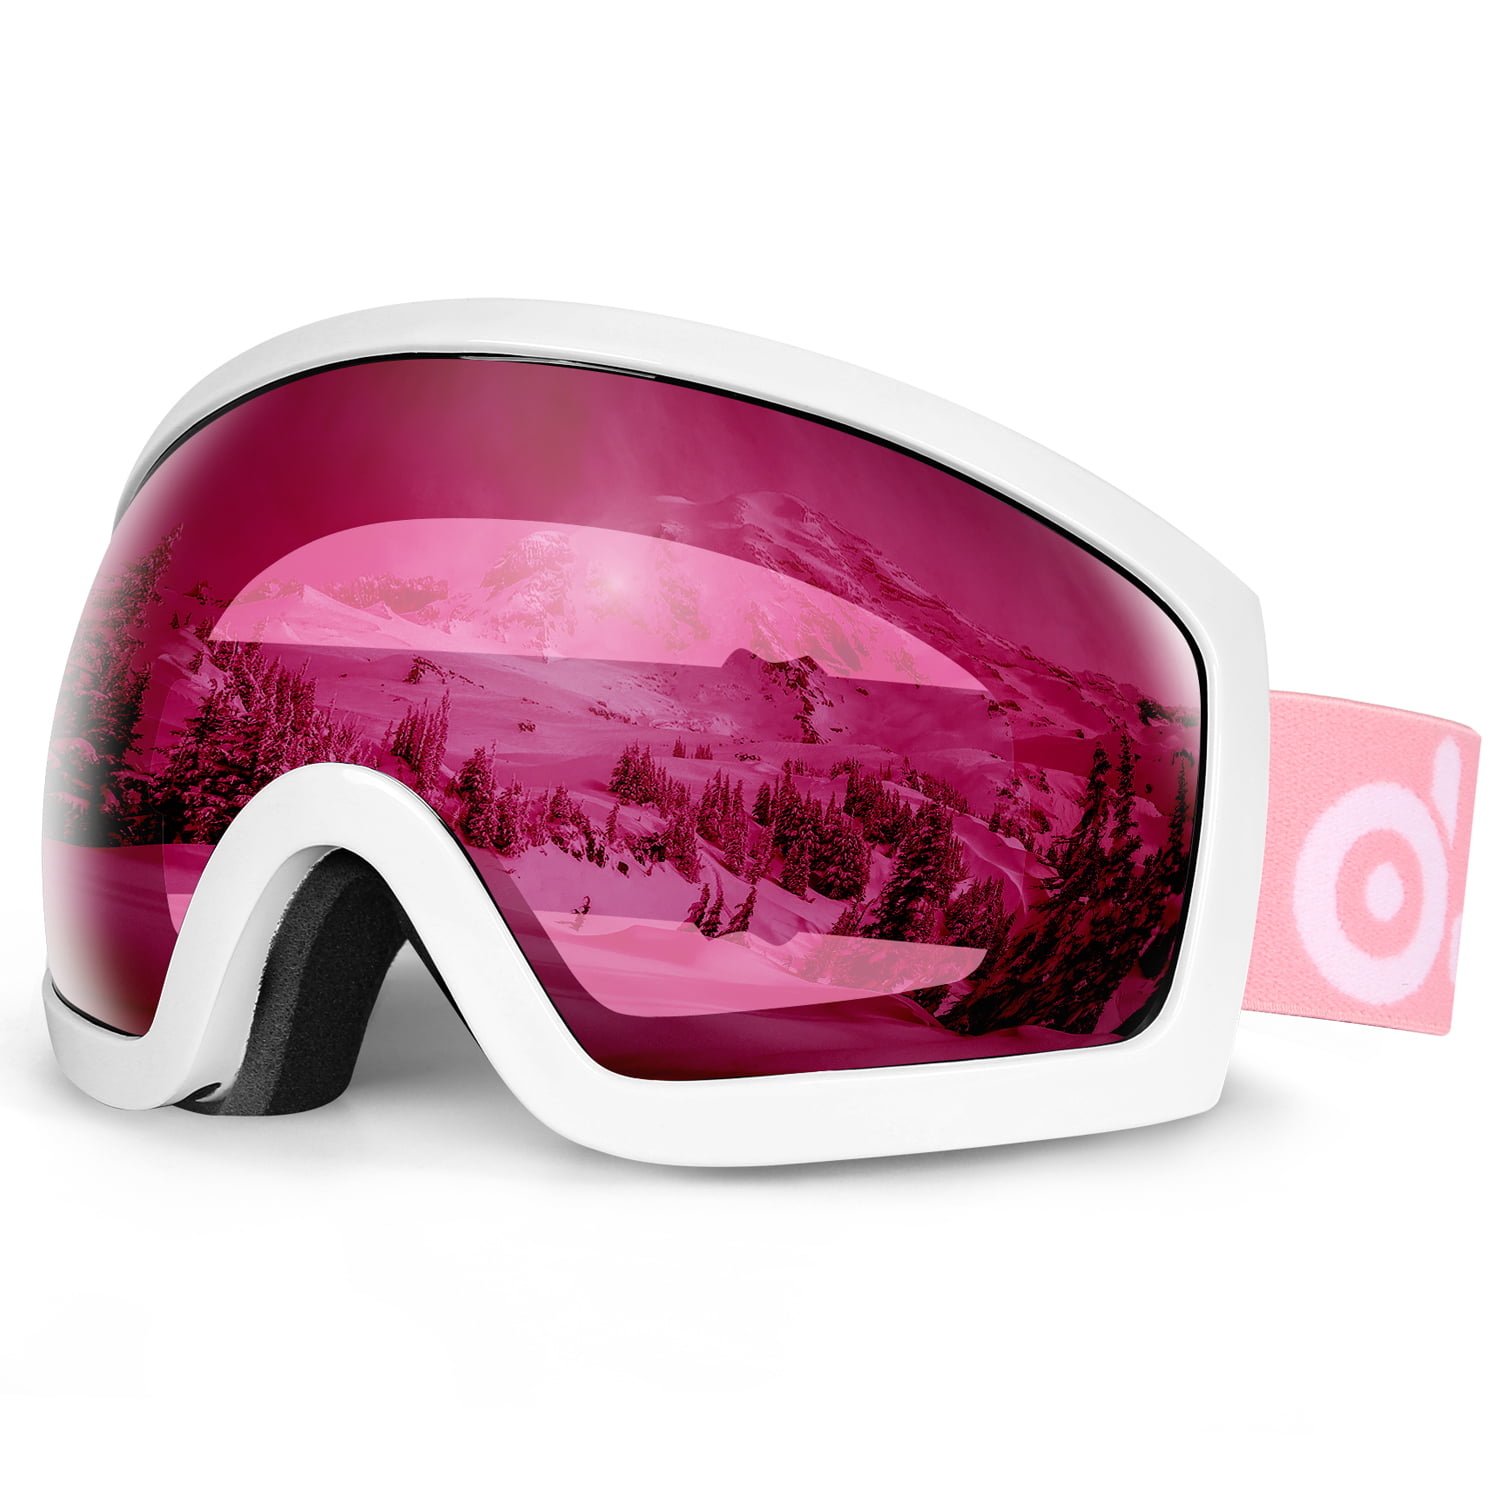 Snow Goggles for Kids,Youth with Anti-Fog 100% UV Protection Spherical Lens Helmet Compatible for Boys Girls OutdoorMaster Kids Ski Goggles Snowboard Goggles 